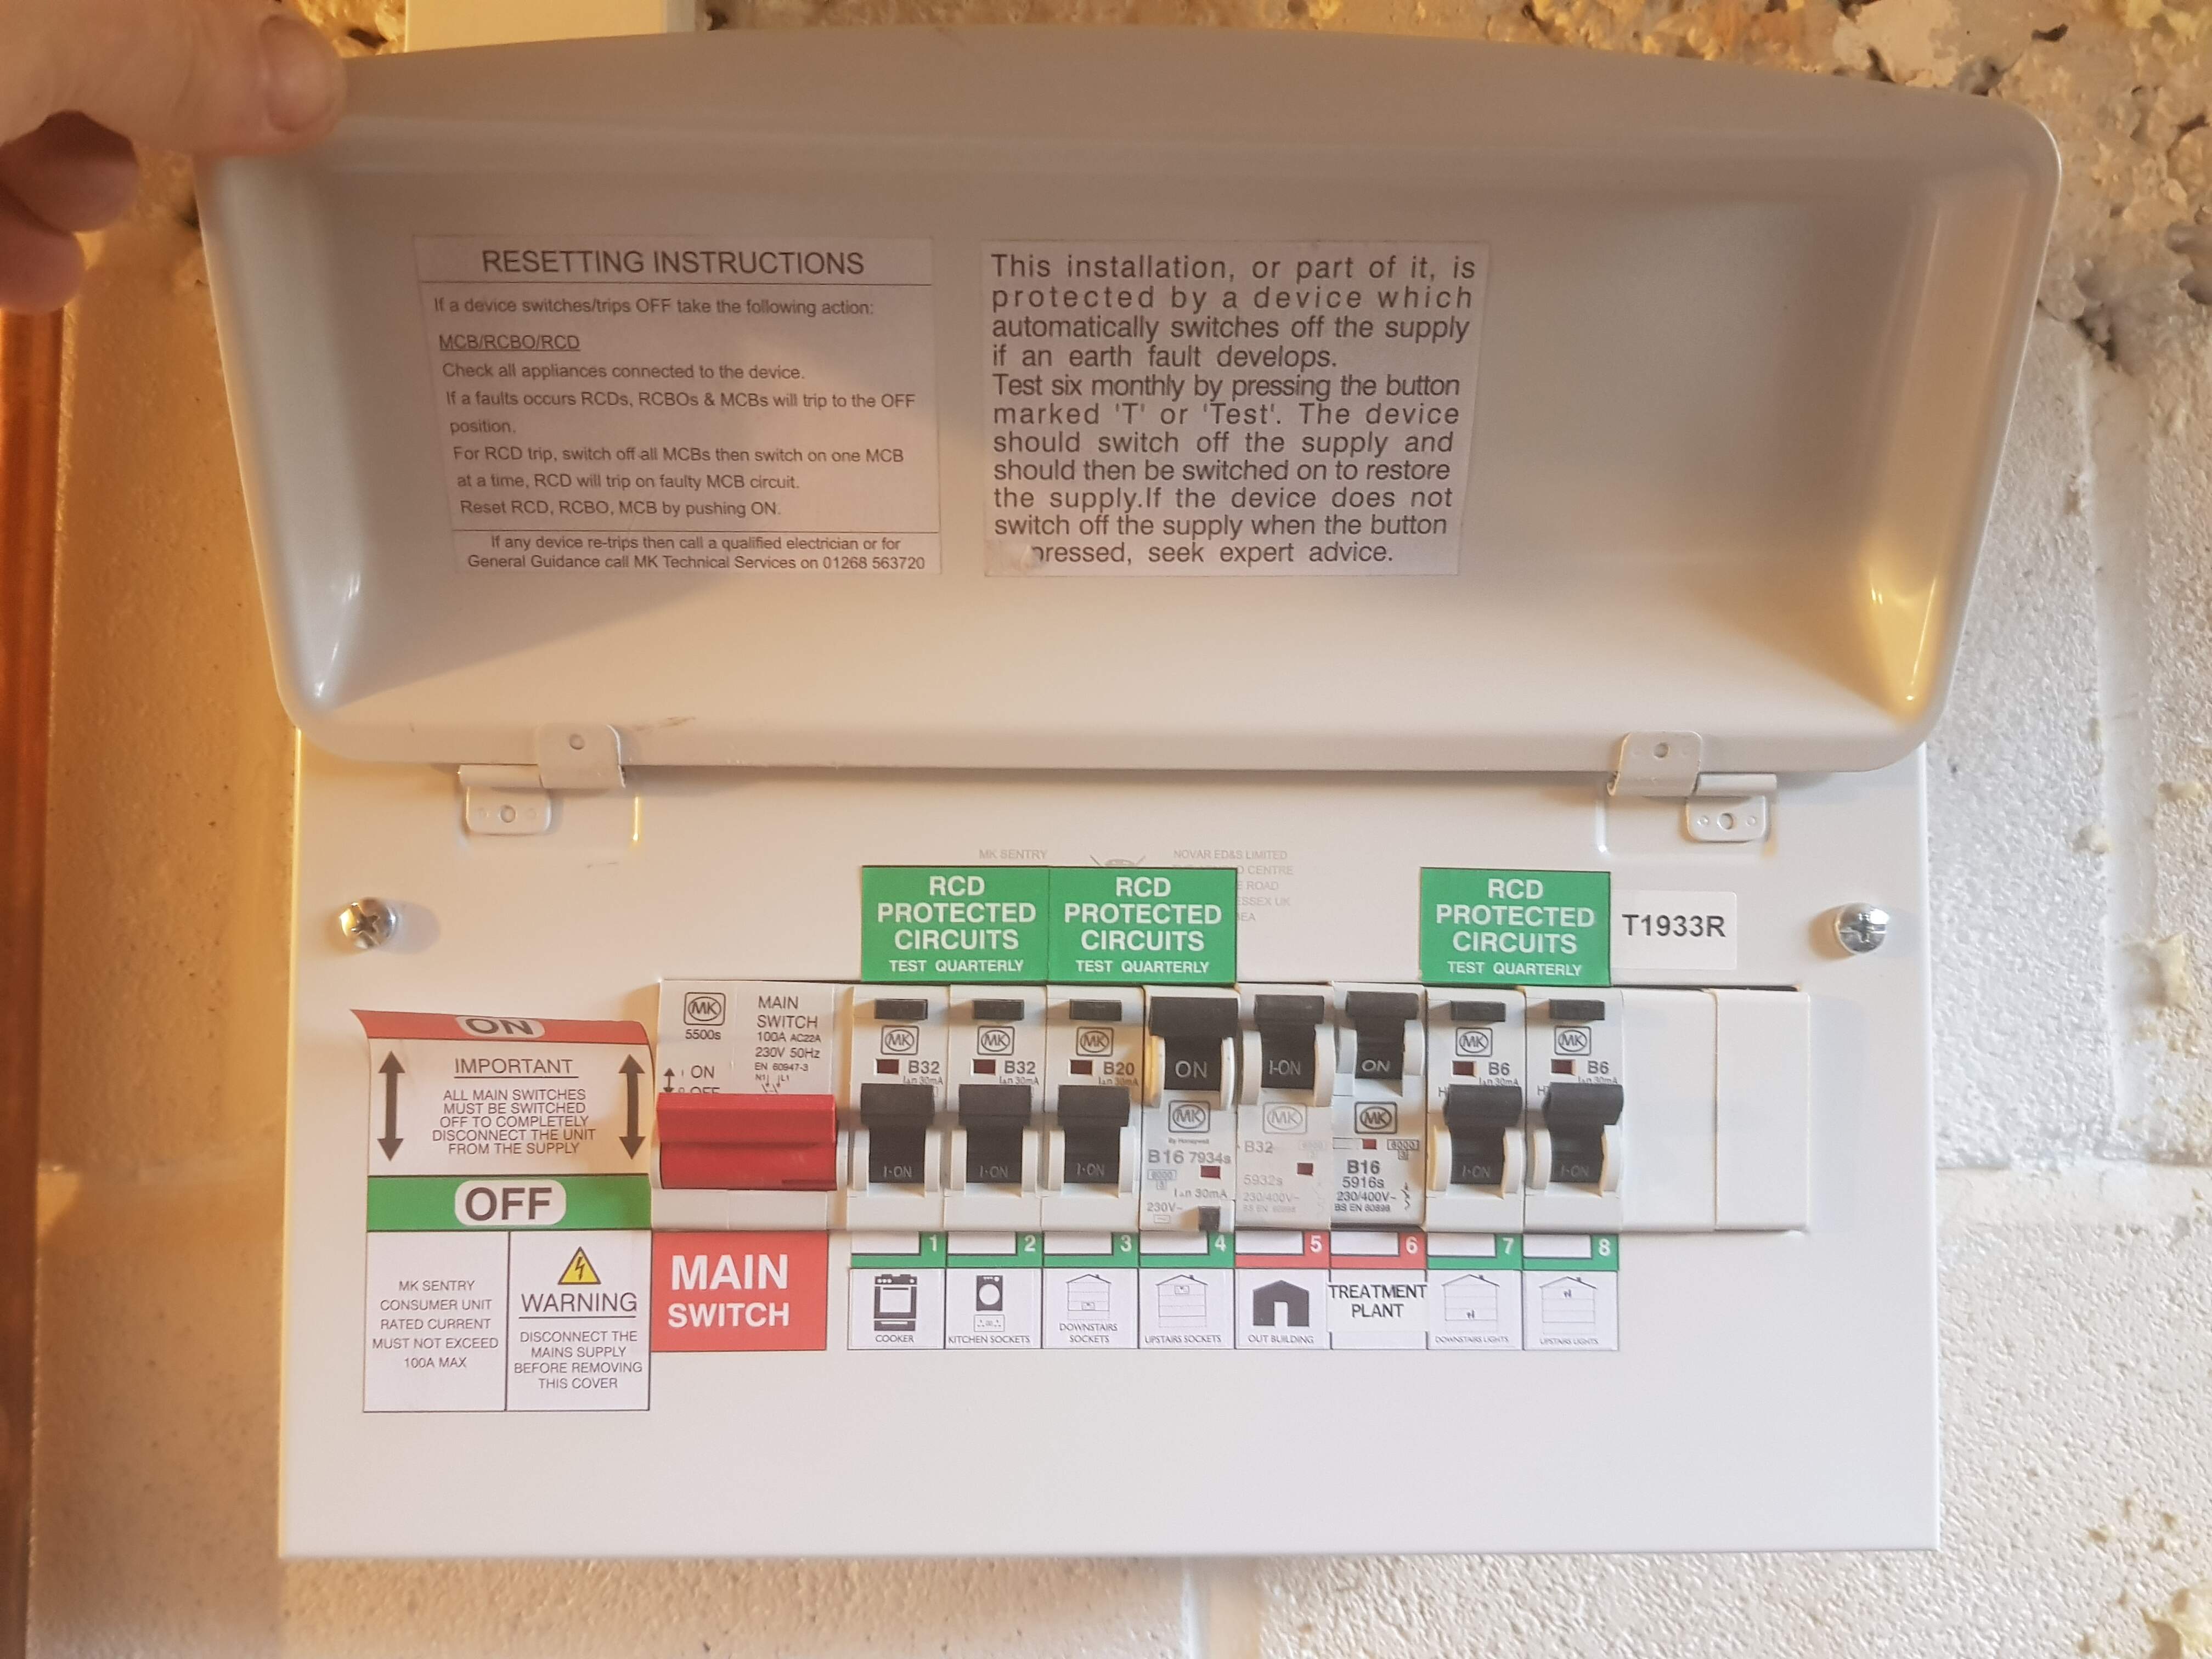 Installation and upgrading of consumer units using a wide range of protective devices